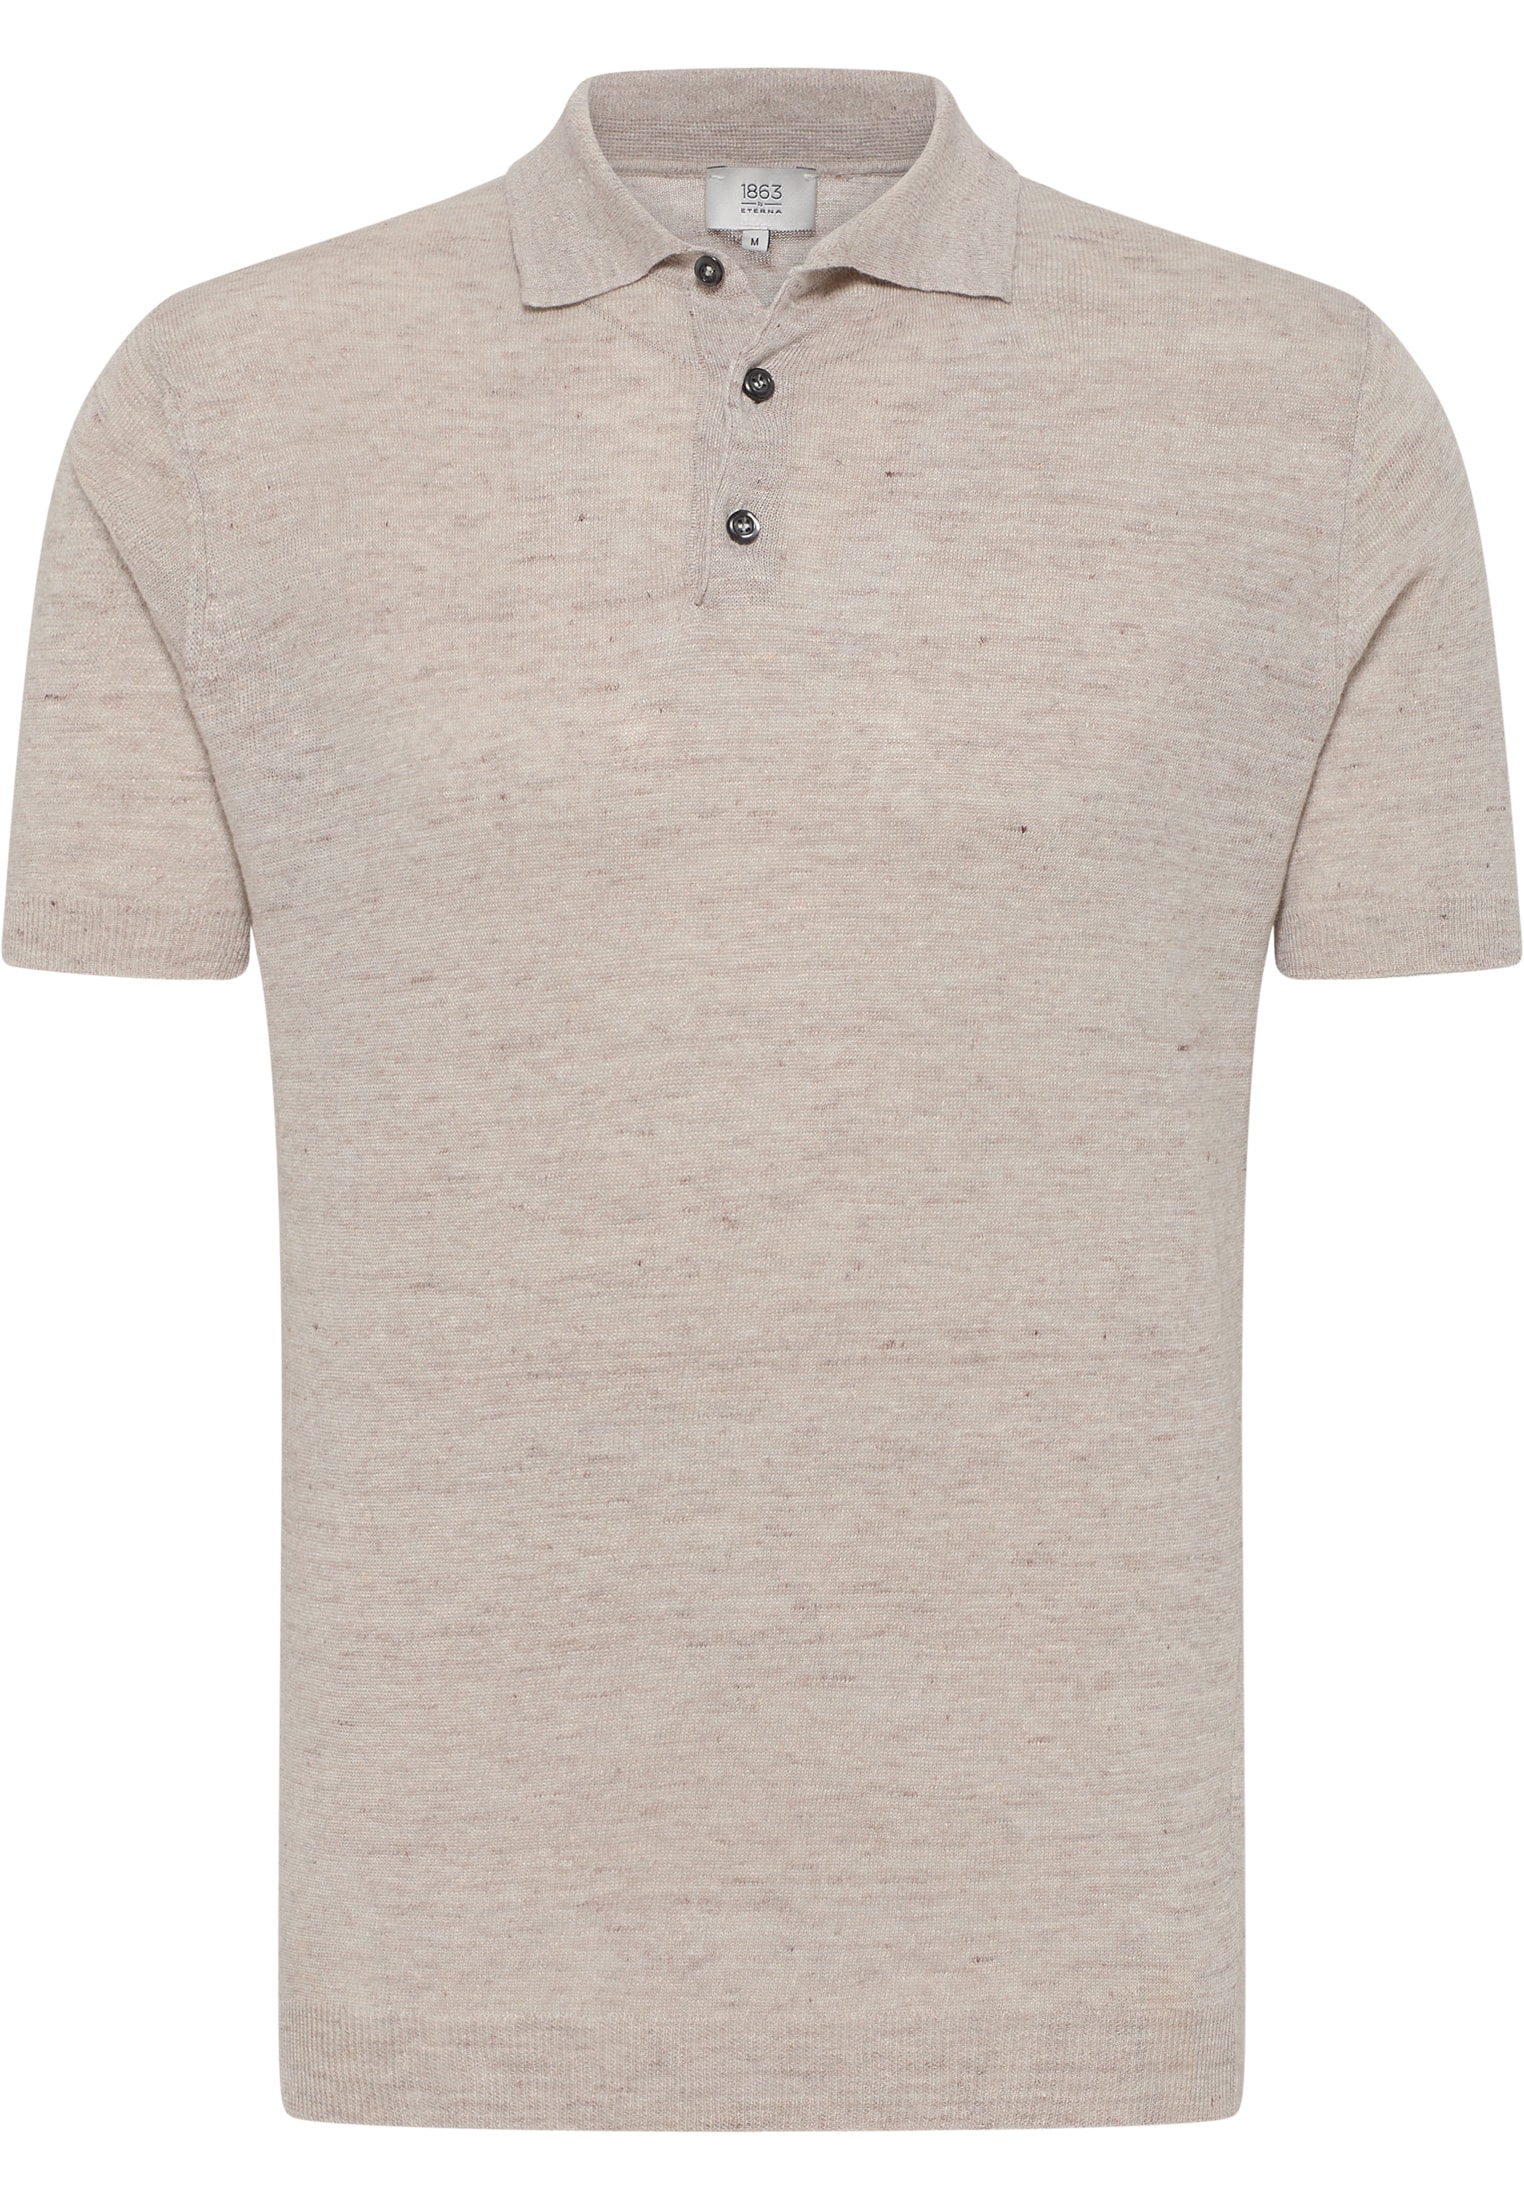 Knitted polo shirt in beige plain